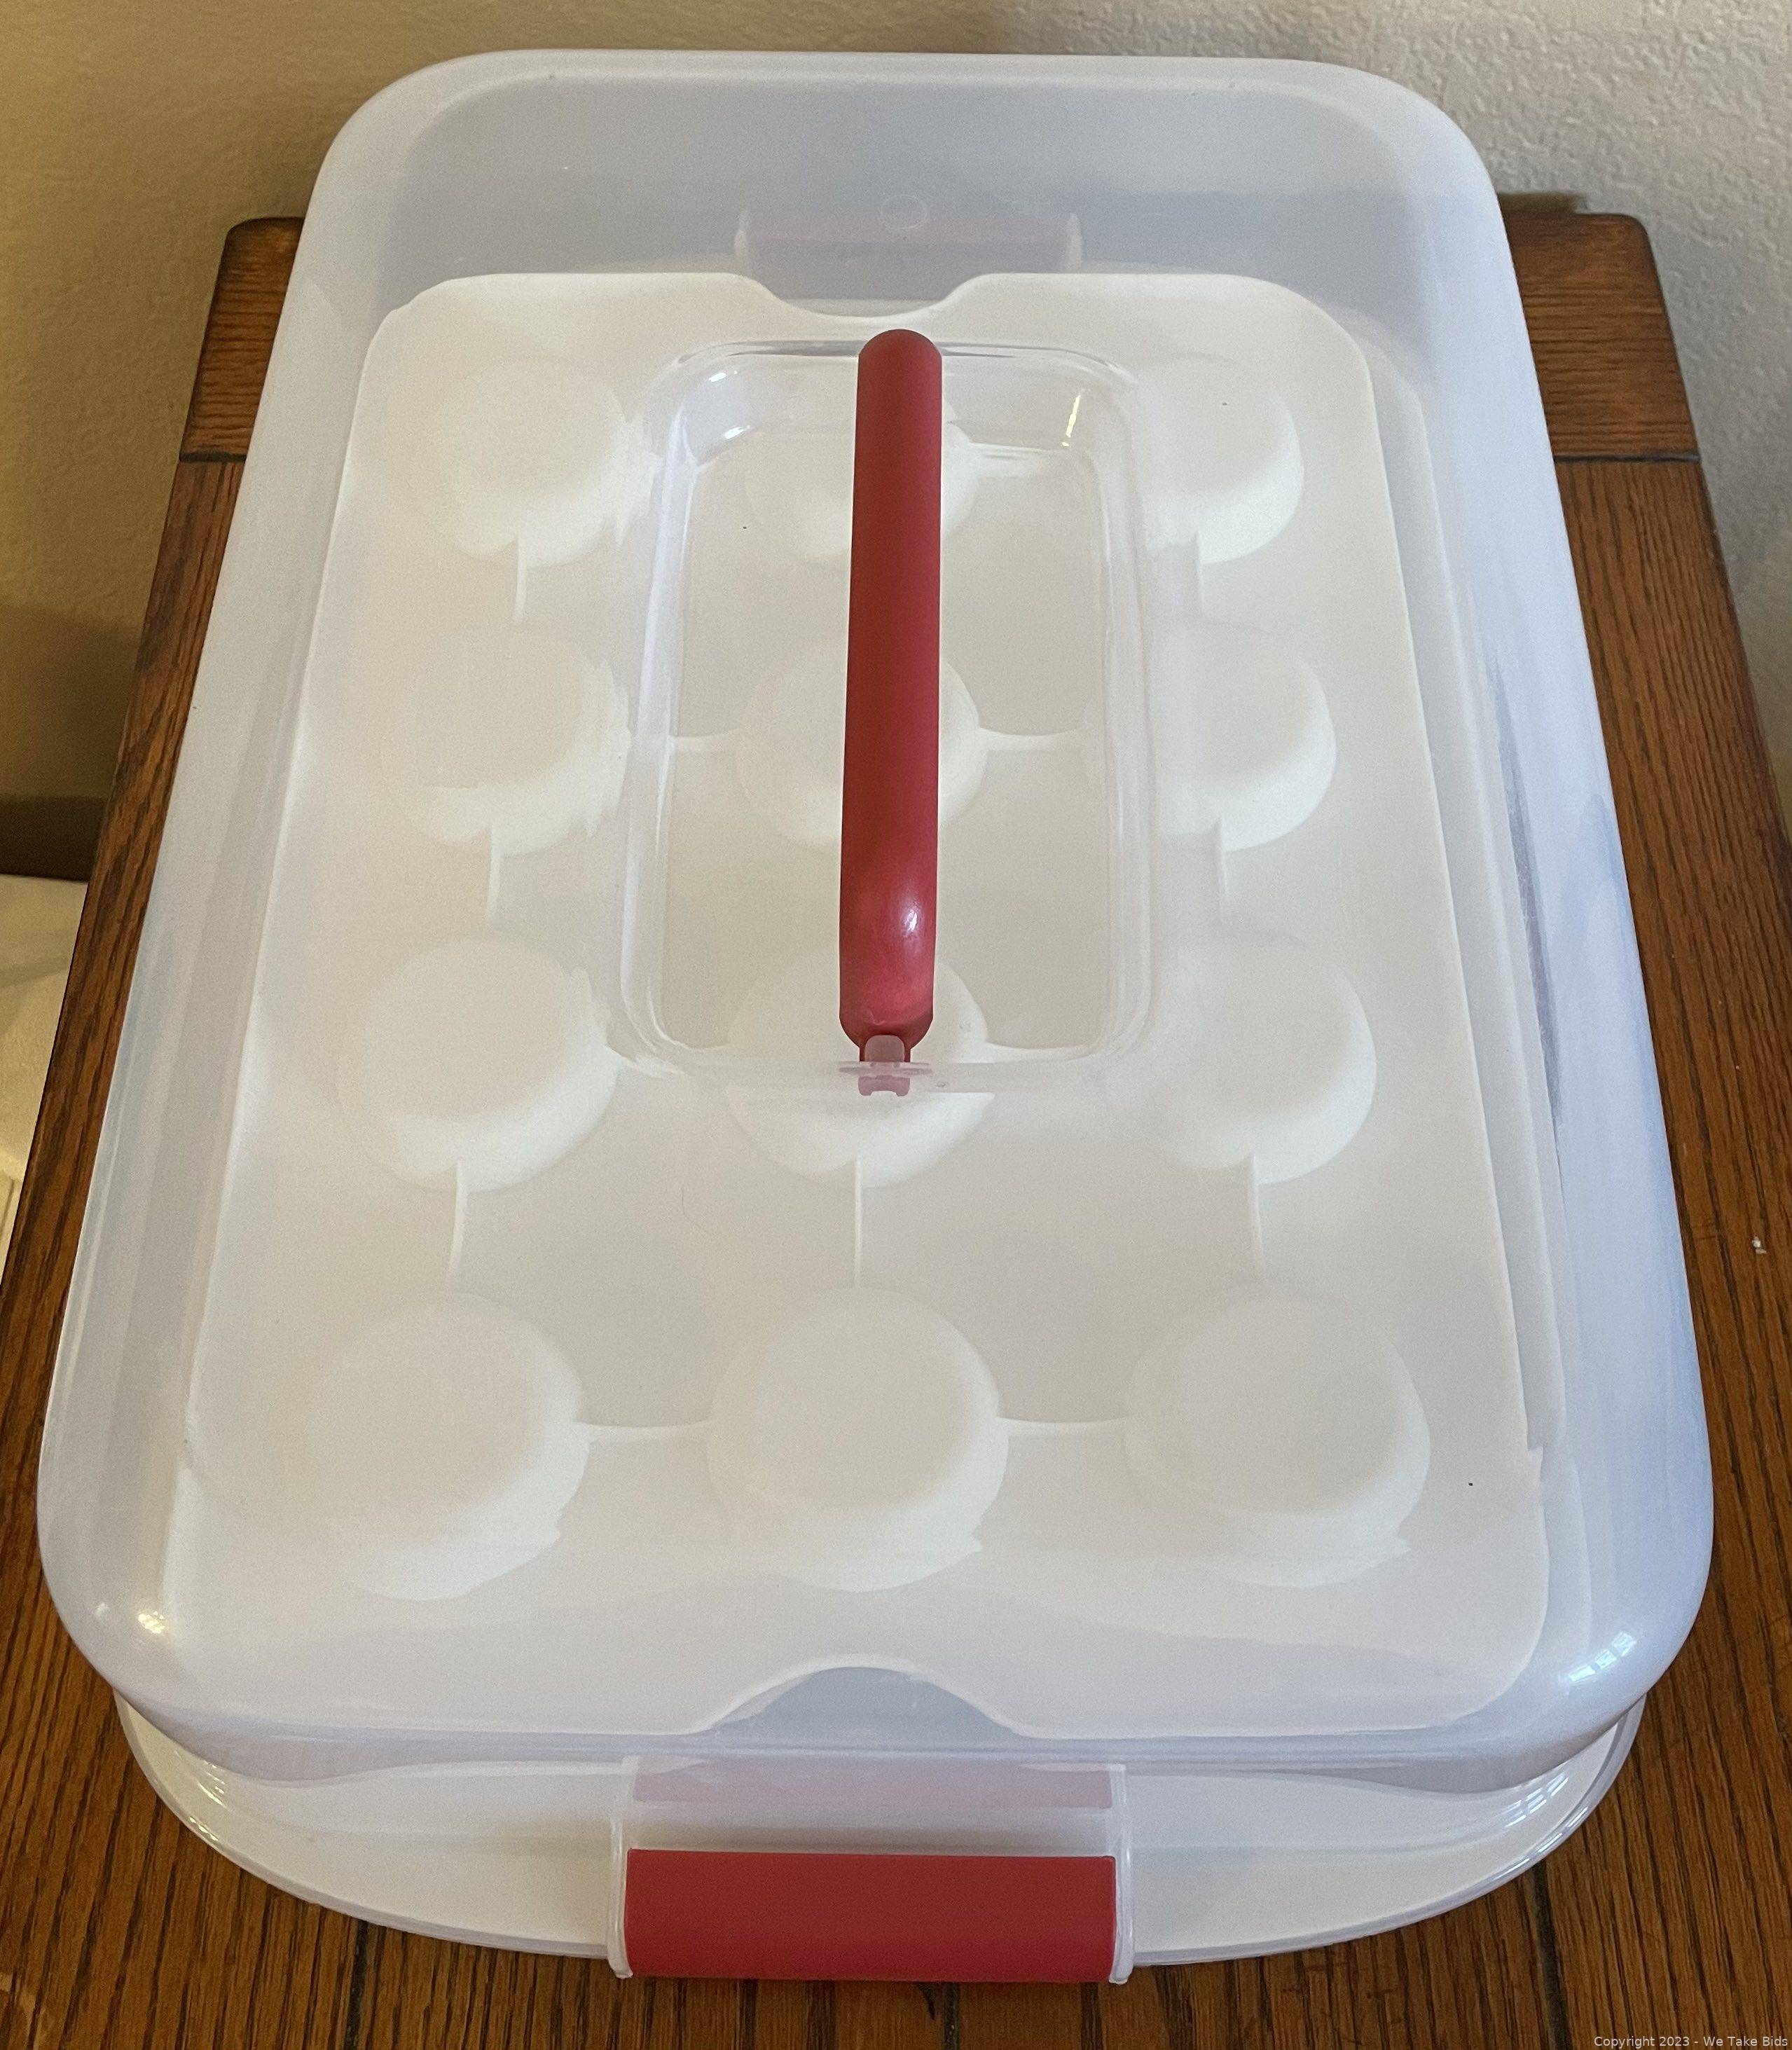 Rubbermaid Cupcake/Egg Carrier Auction